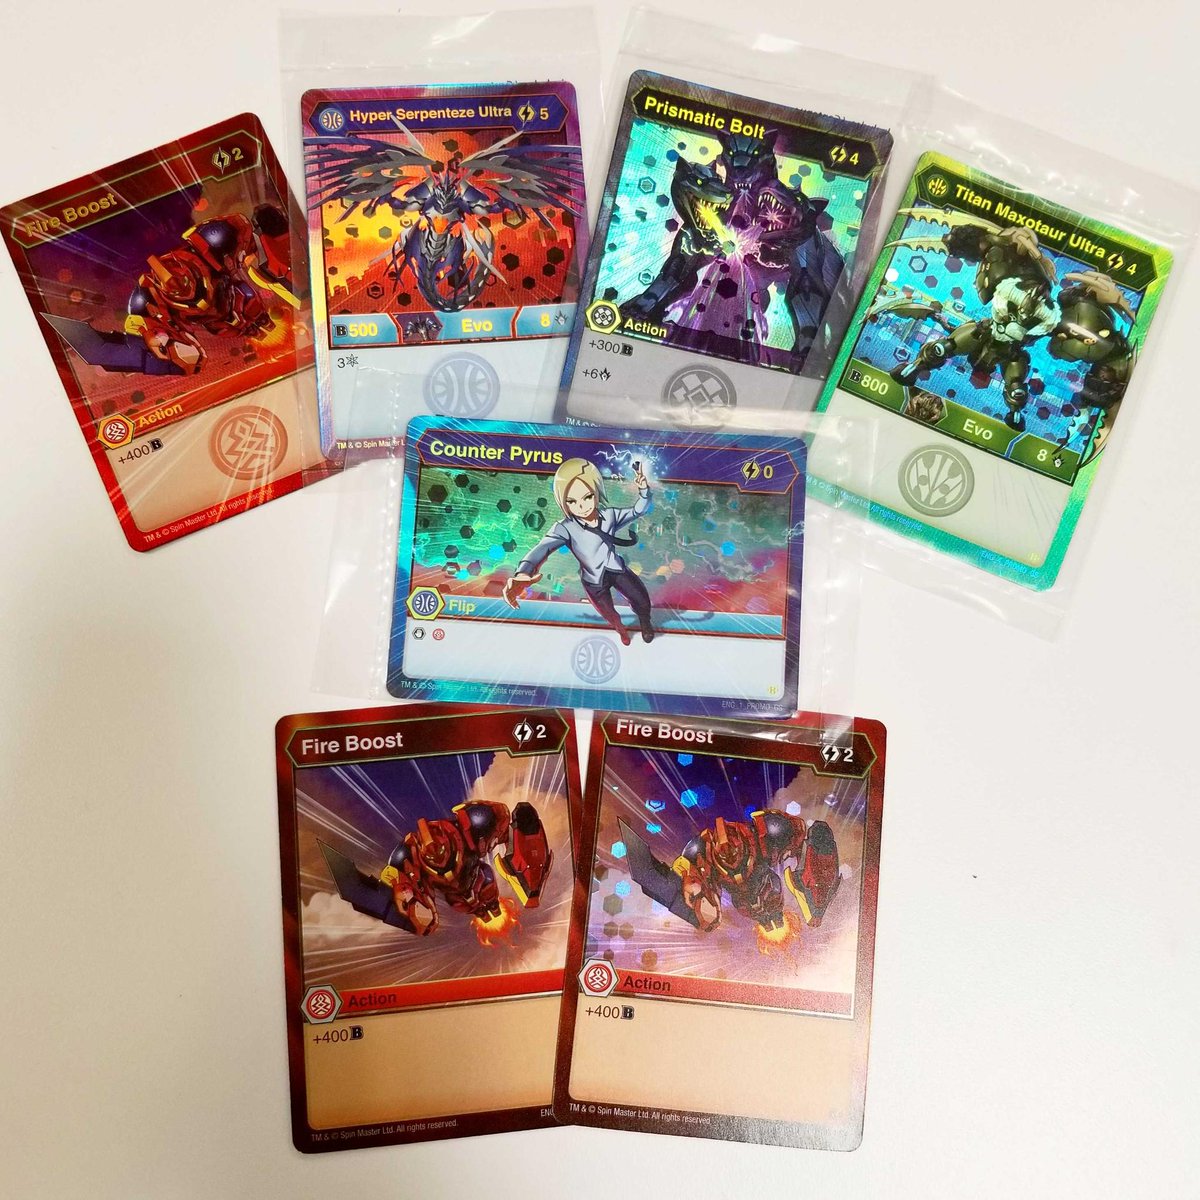 Majestuoso Espacioso Conflicto Bakugan al Twitter: "Learn how to play, Brawl against fellow #Bakugan fans,  and obtain five exclusive Hexfoil Bakugan Elite versions of Battle Brawlers  TCG cards! It all goes down 2-4PM this Saturday